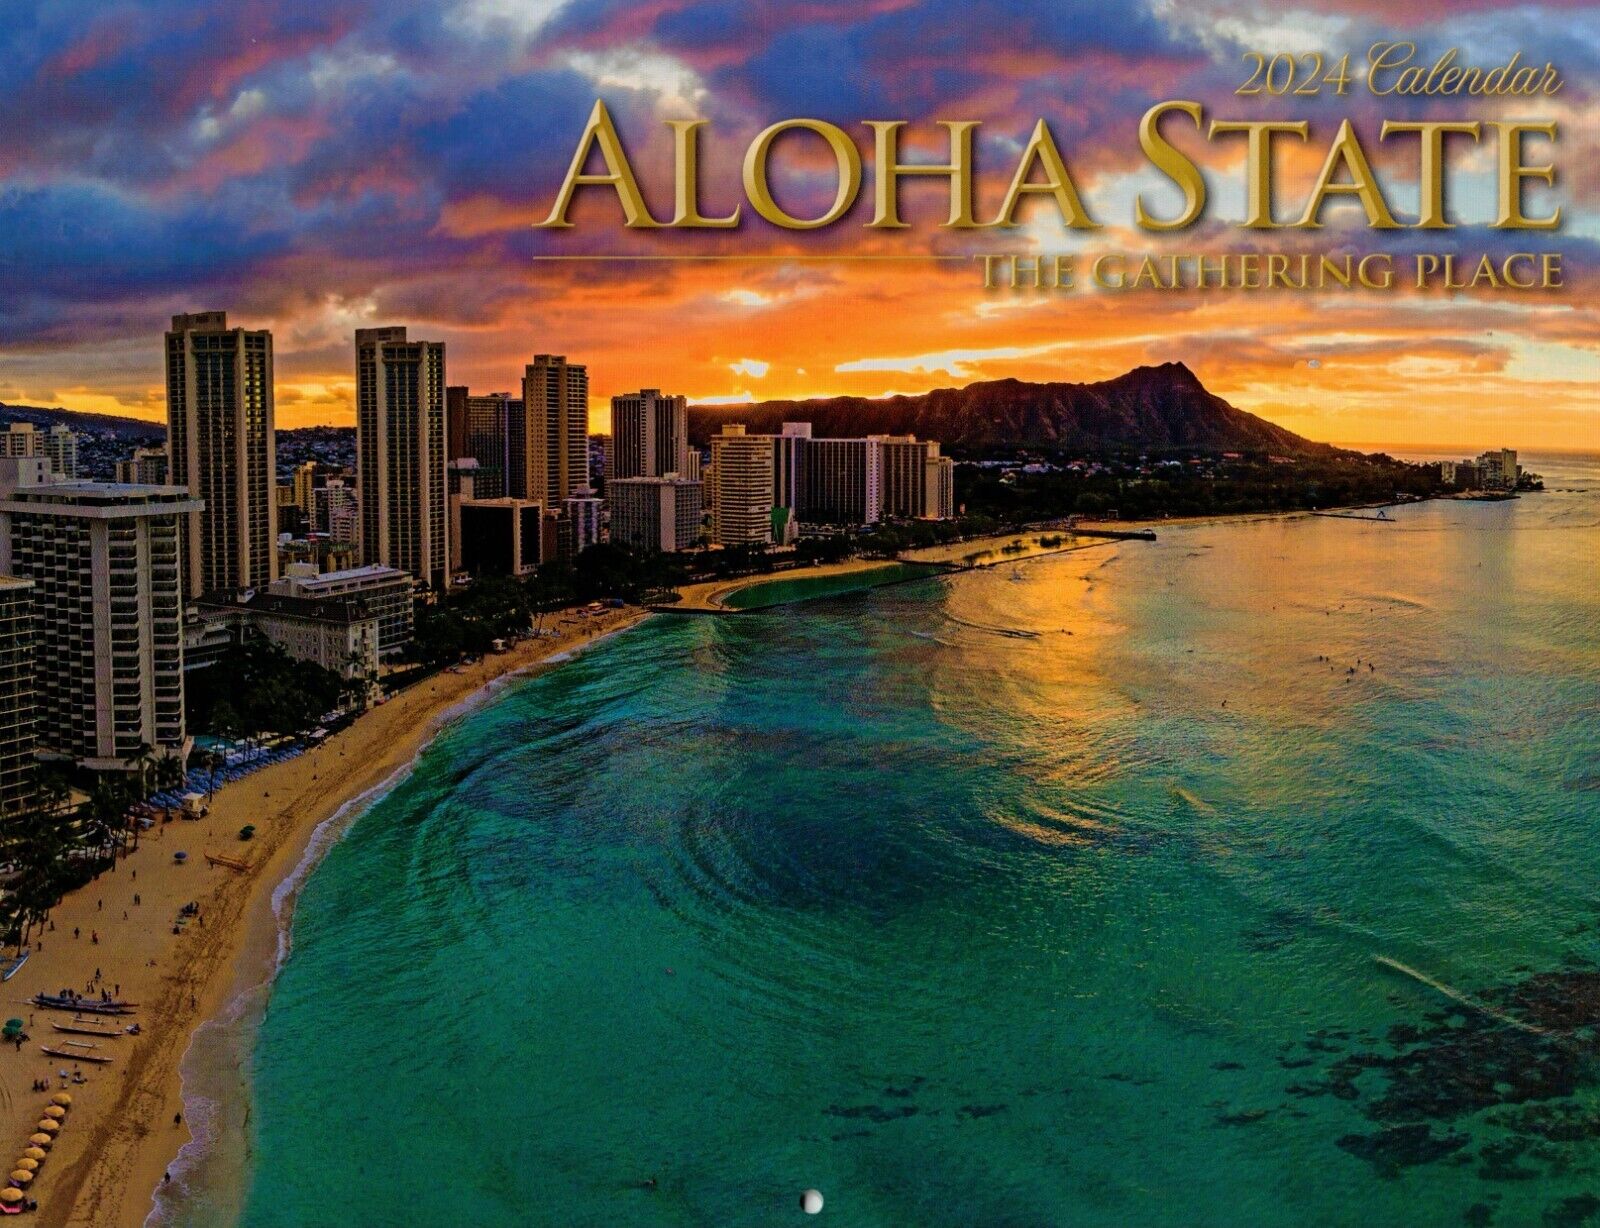 2024 Calendar Aloha State The Gathering Place Great Christmas Gift from Hawaii